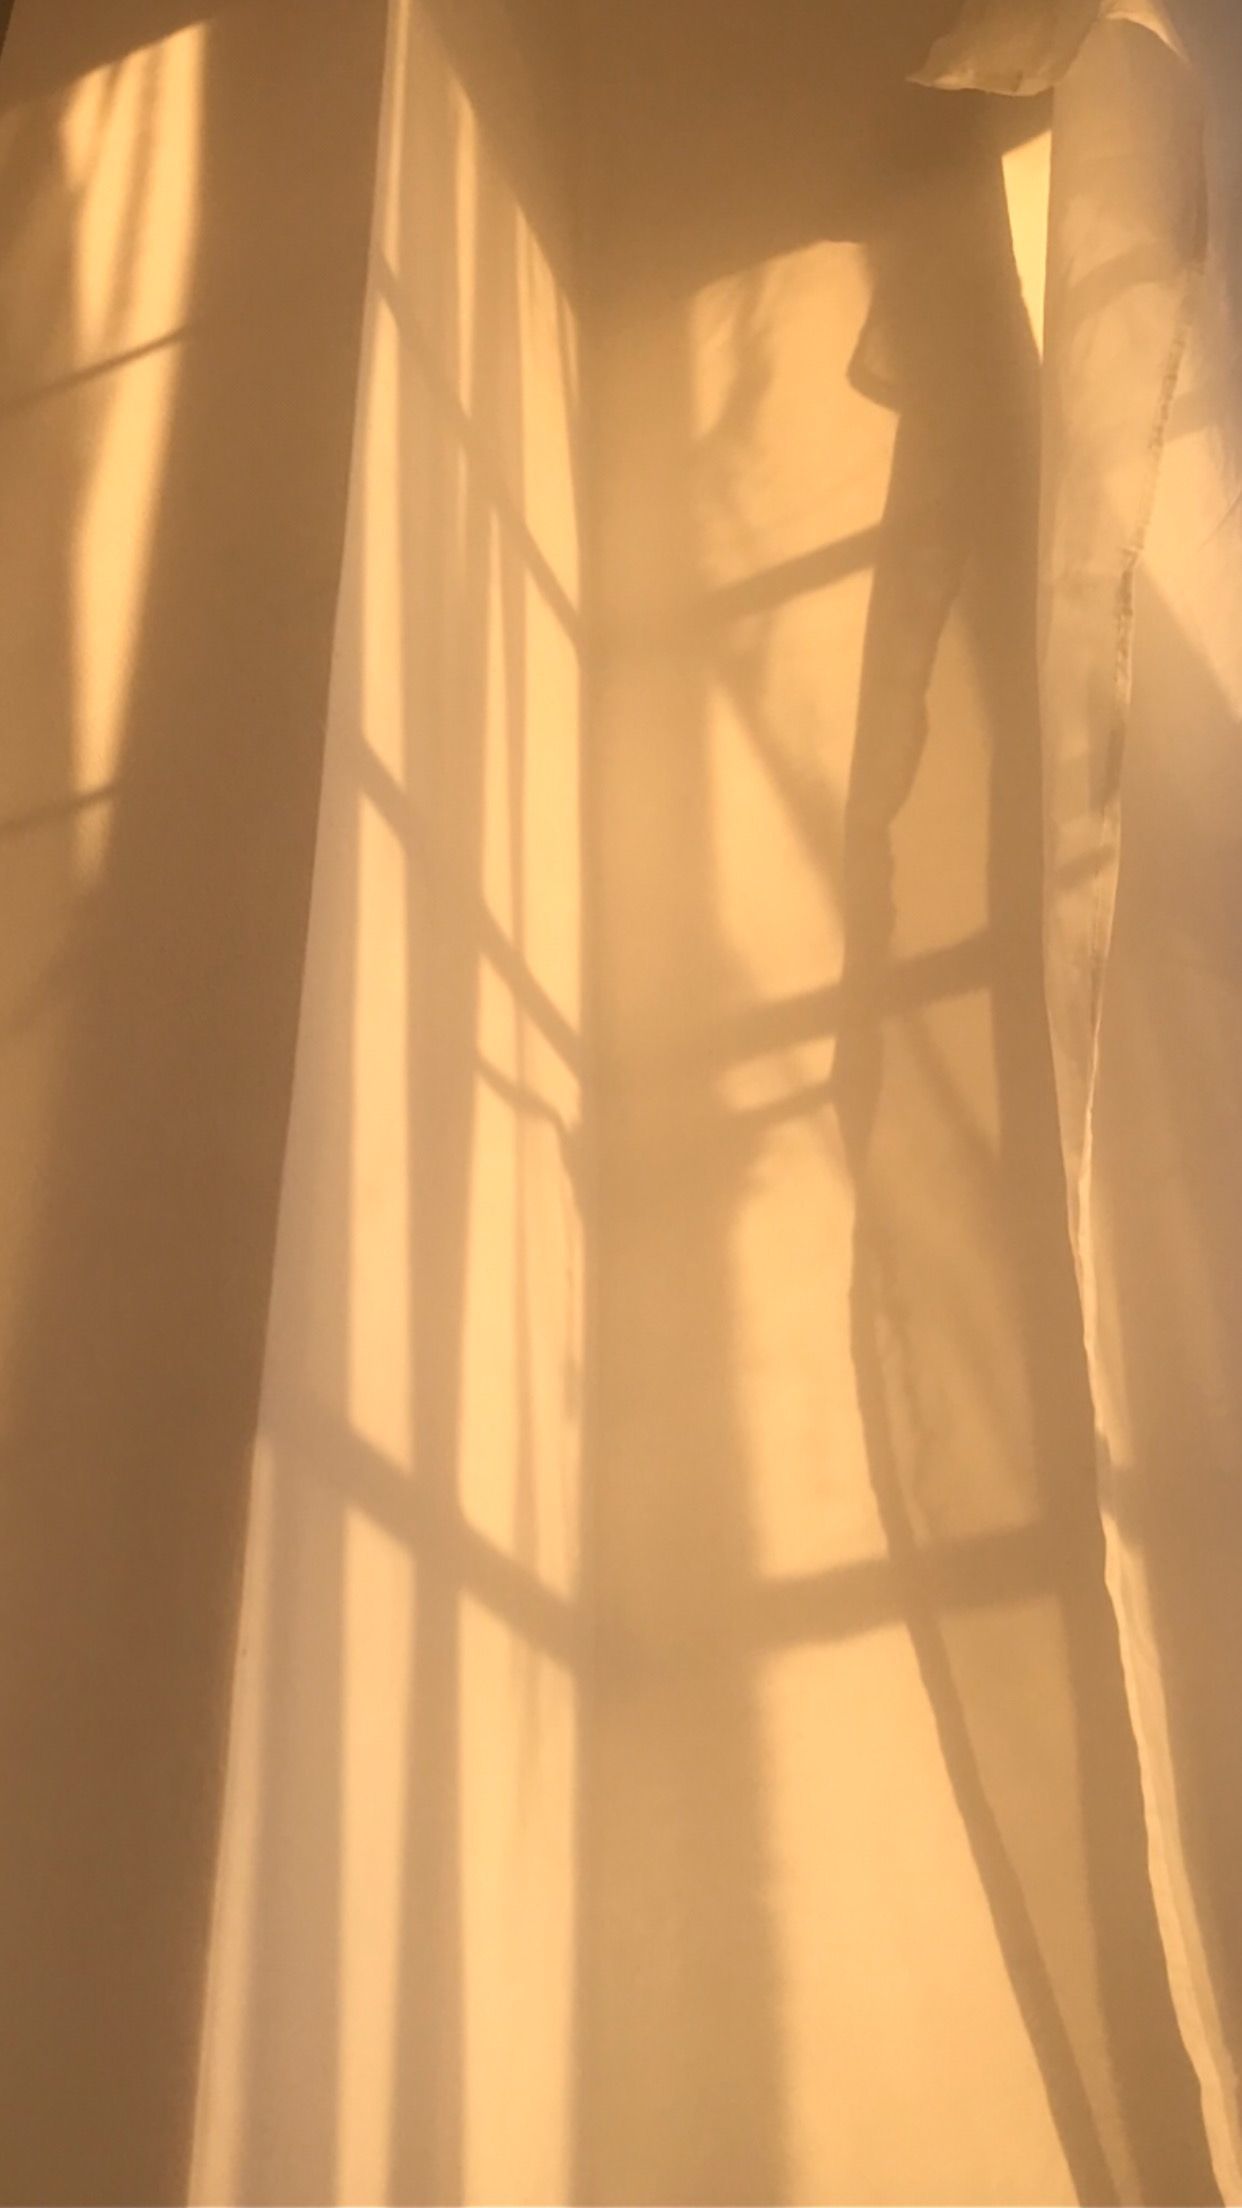 A shadow of a person standing near a window with light coming through the curtains. - Sunlight